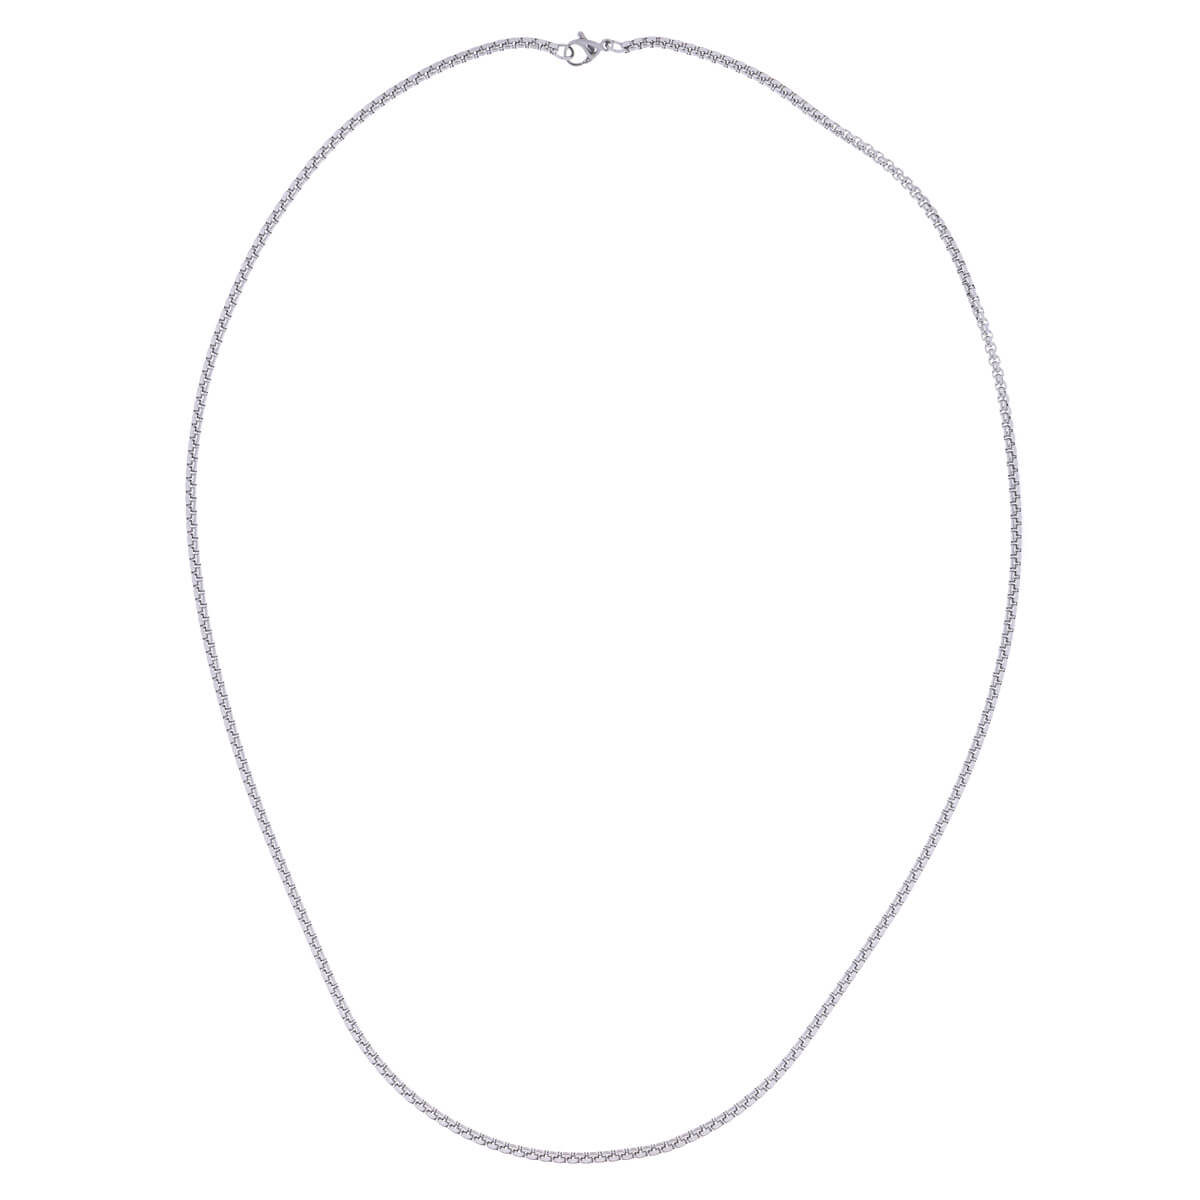 Thin steel necklace 3mm 60cm